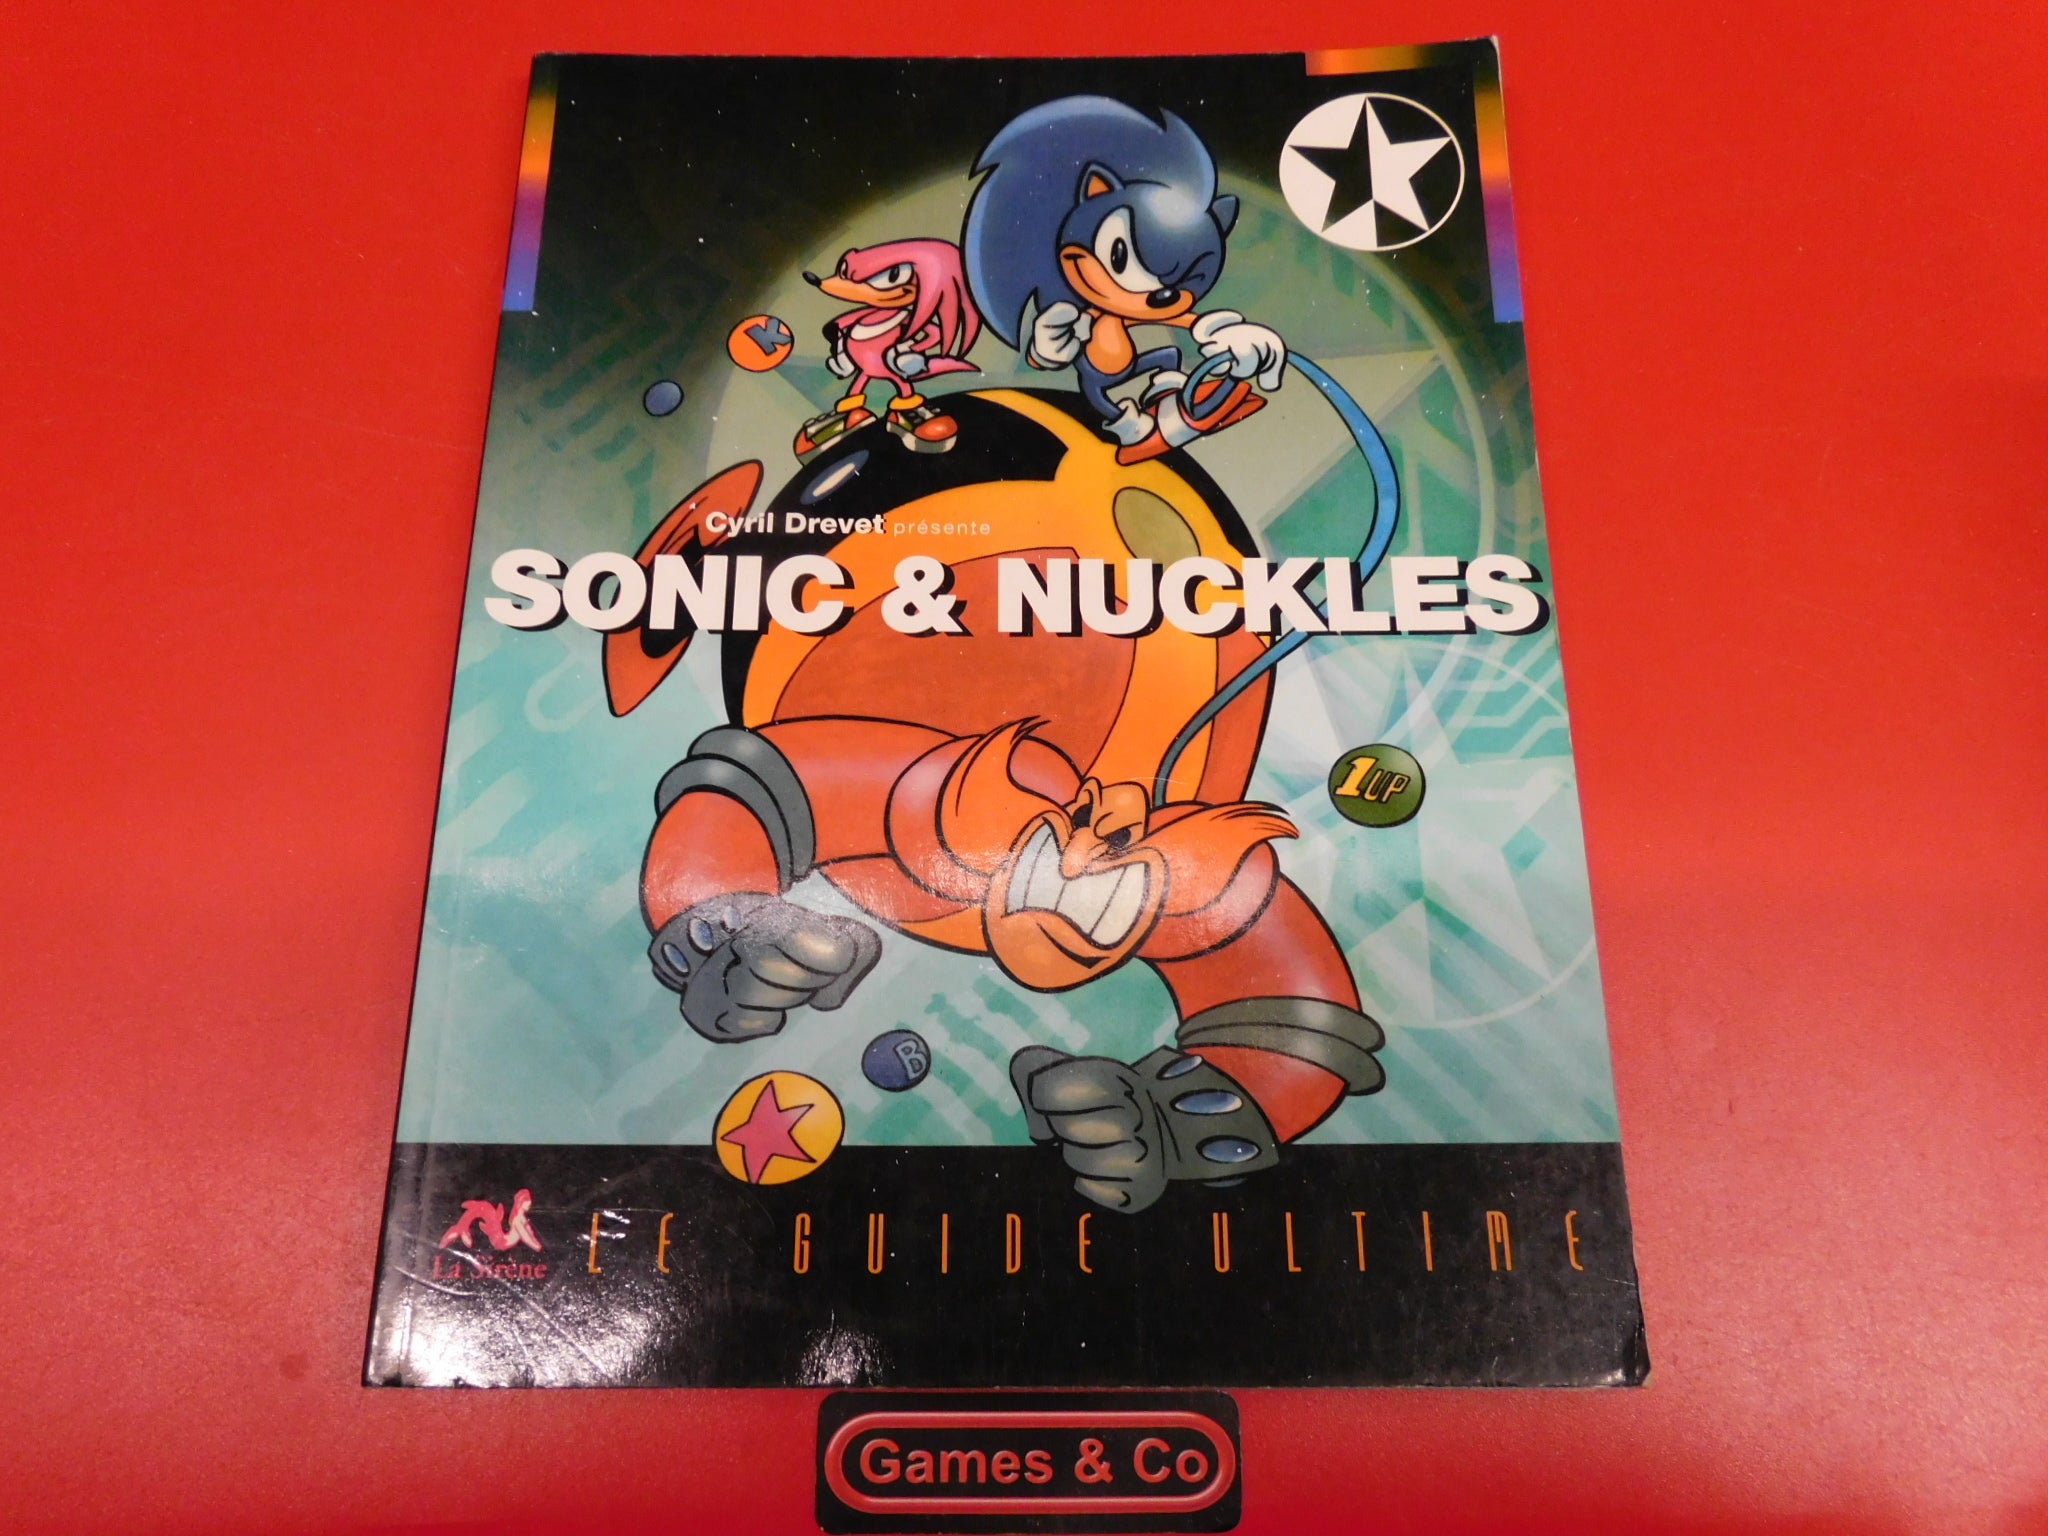 SONIC & NUCKLES LE GUIDE ULTIME